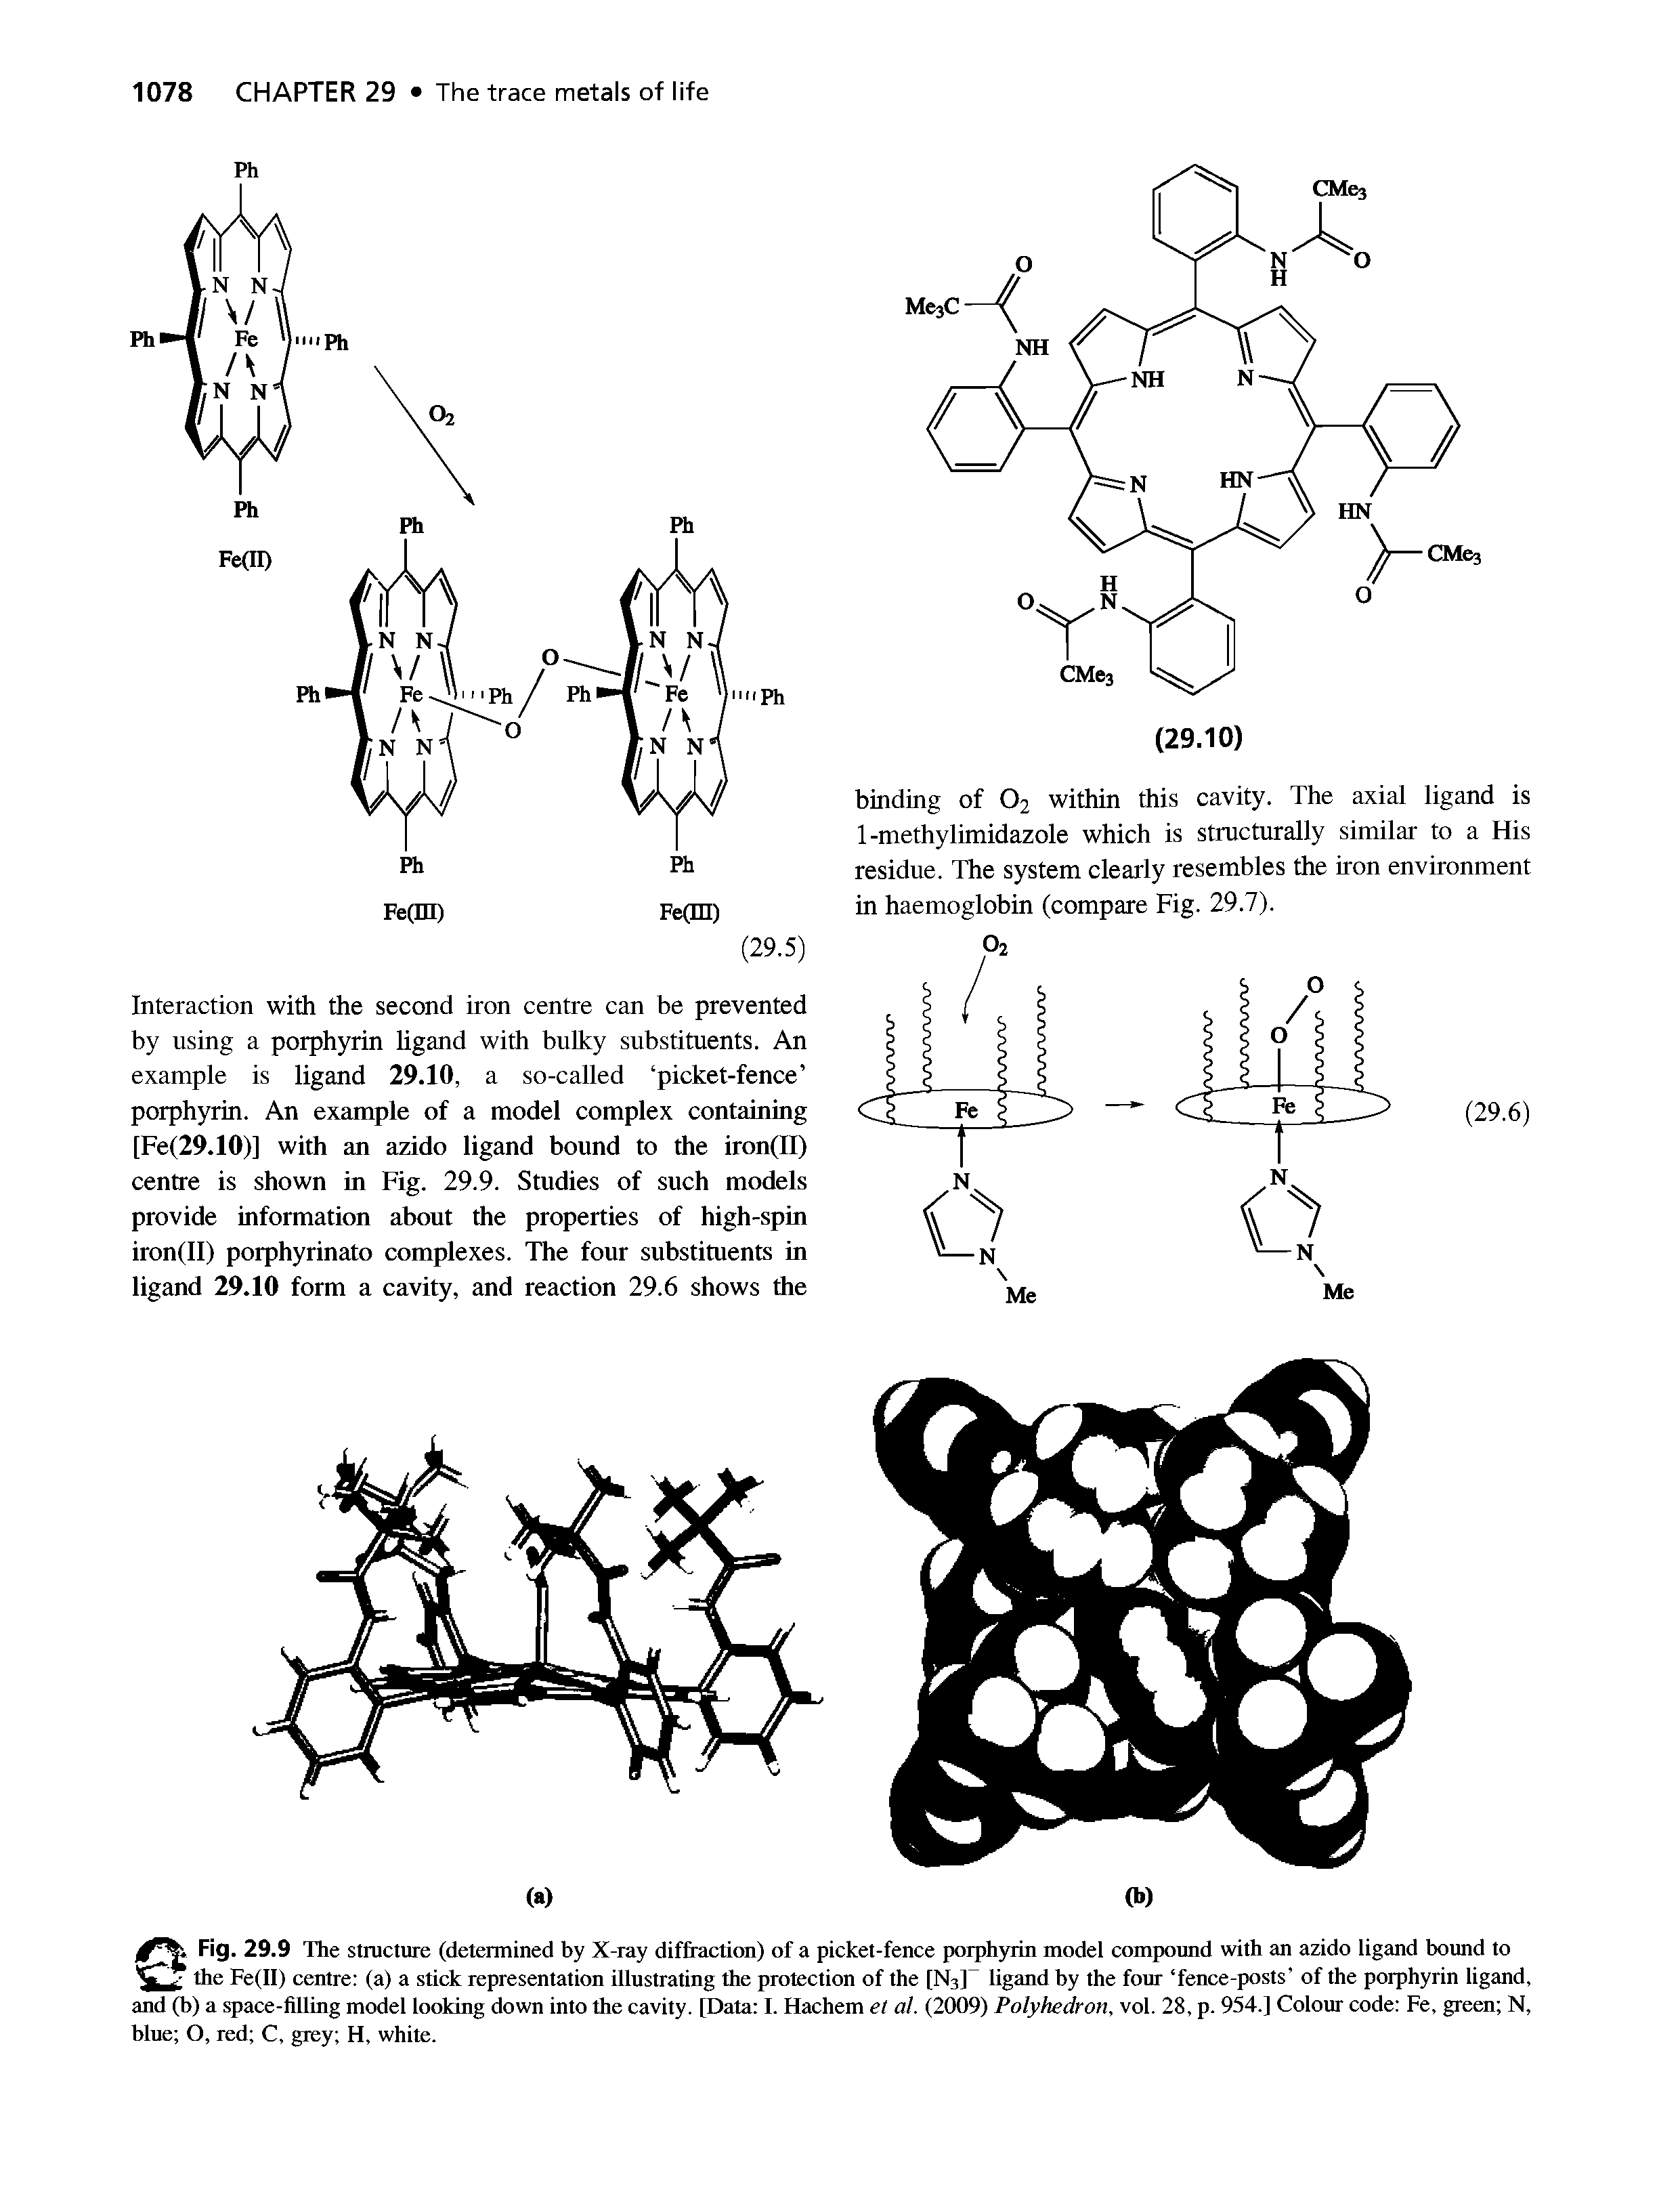 Fig. 29.9 The structure (determined by X-ray diffractirai) of a picket-fence porphyrin model compound with an azido ligand bound to the Fe(II) centre (a) a stick representation illustrating the protection of the [N3] ligand by the four fence-posts of the porphyrin ligand, and (b) a space-filling model looking down into the cavity. [Data I. Hachem e( al. (2009) Polyhedron, vol. 28, p. 954.] Coloin code Fe, gretai N, blue O, red C, grey H, white.